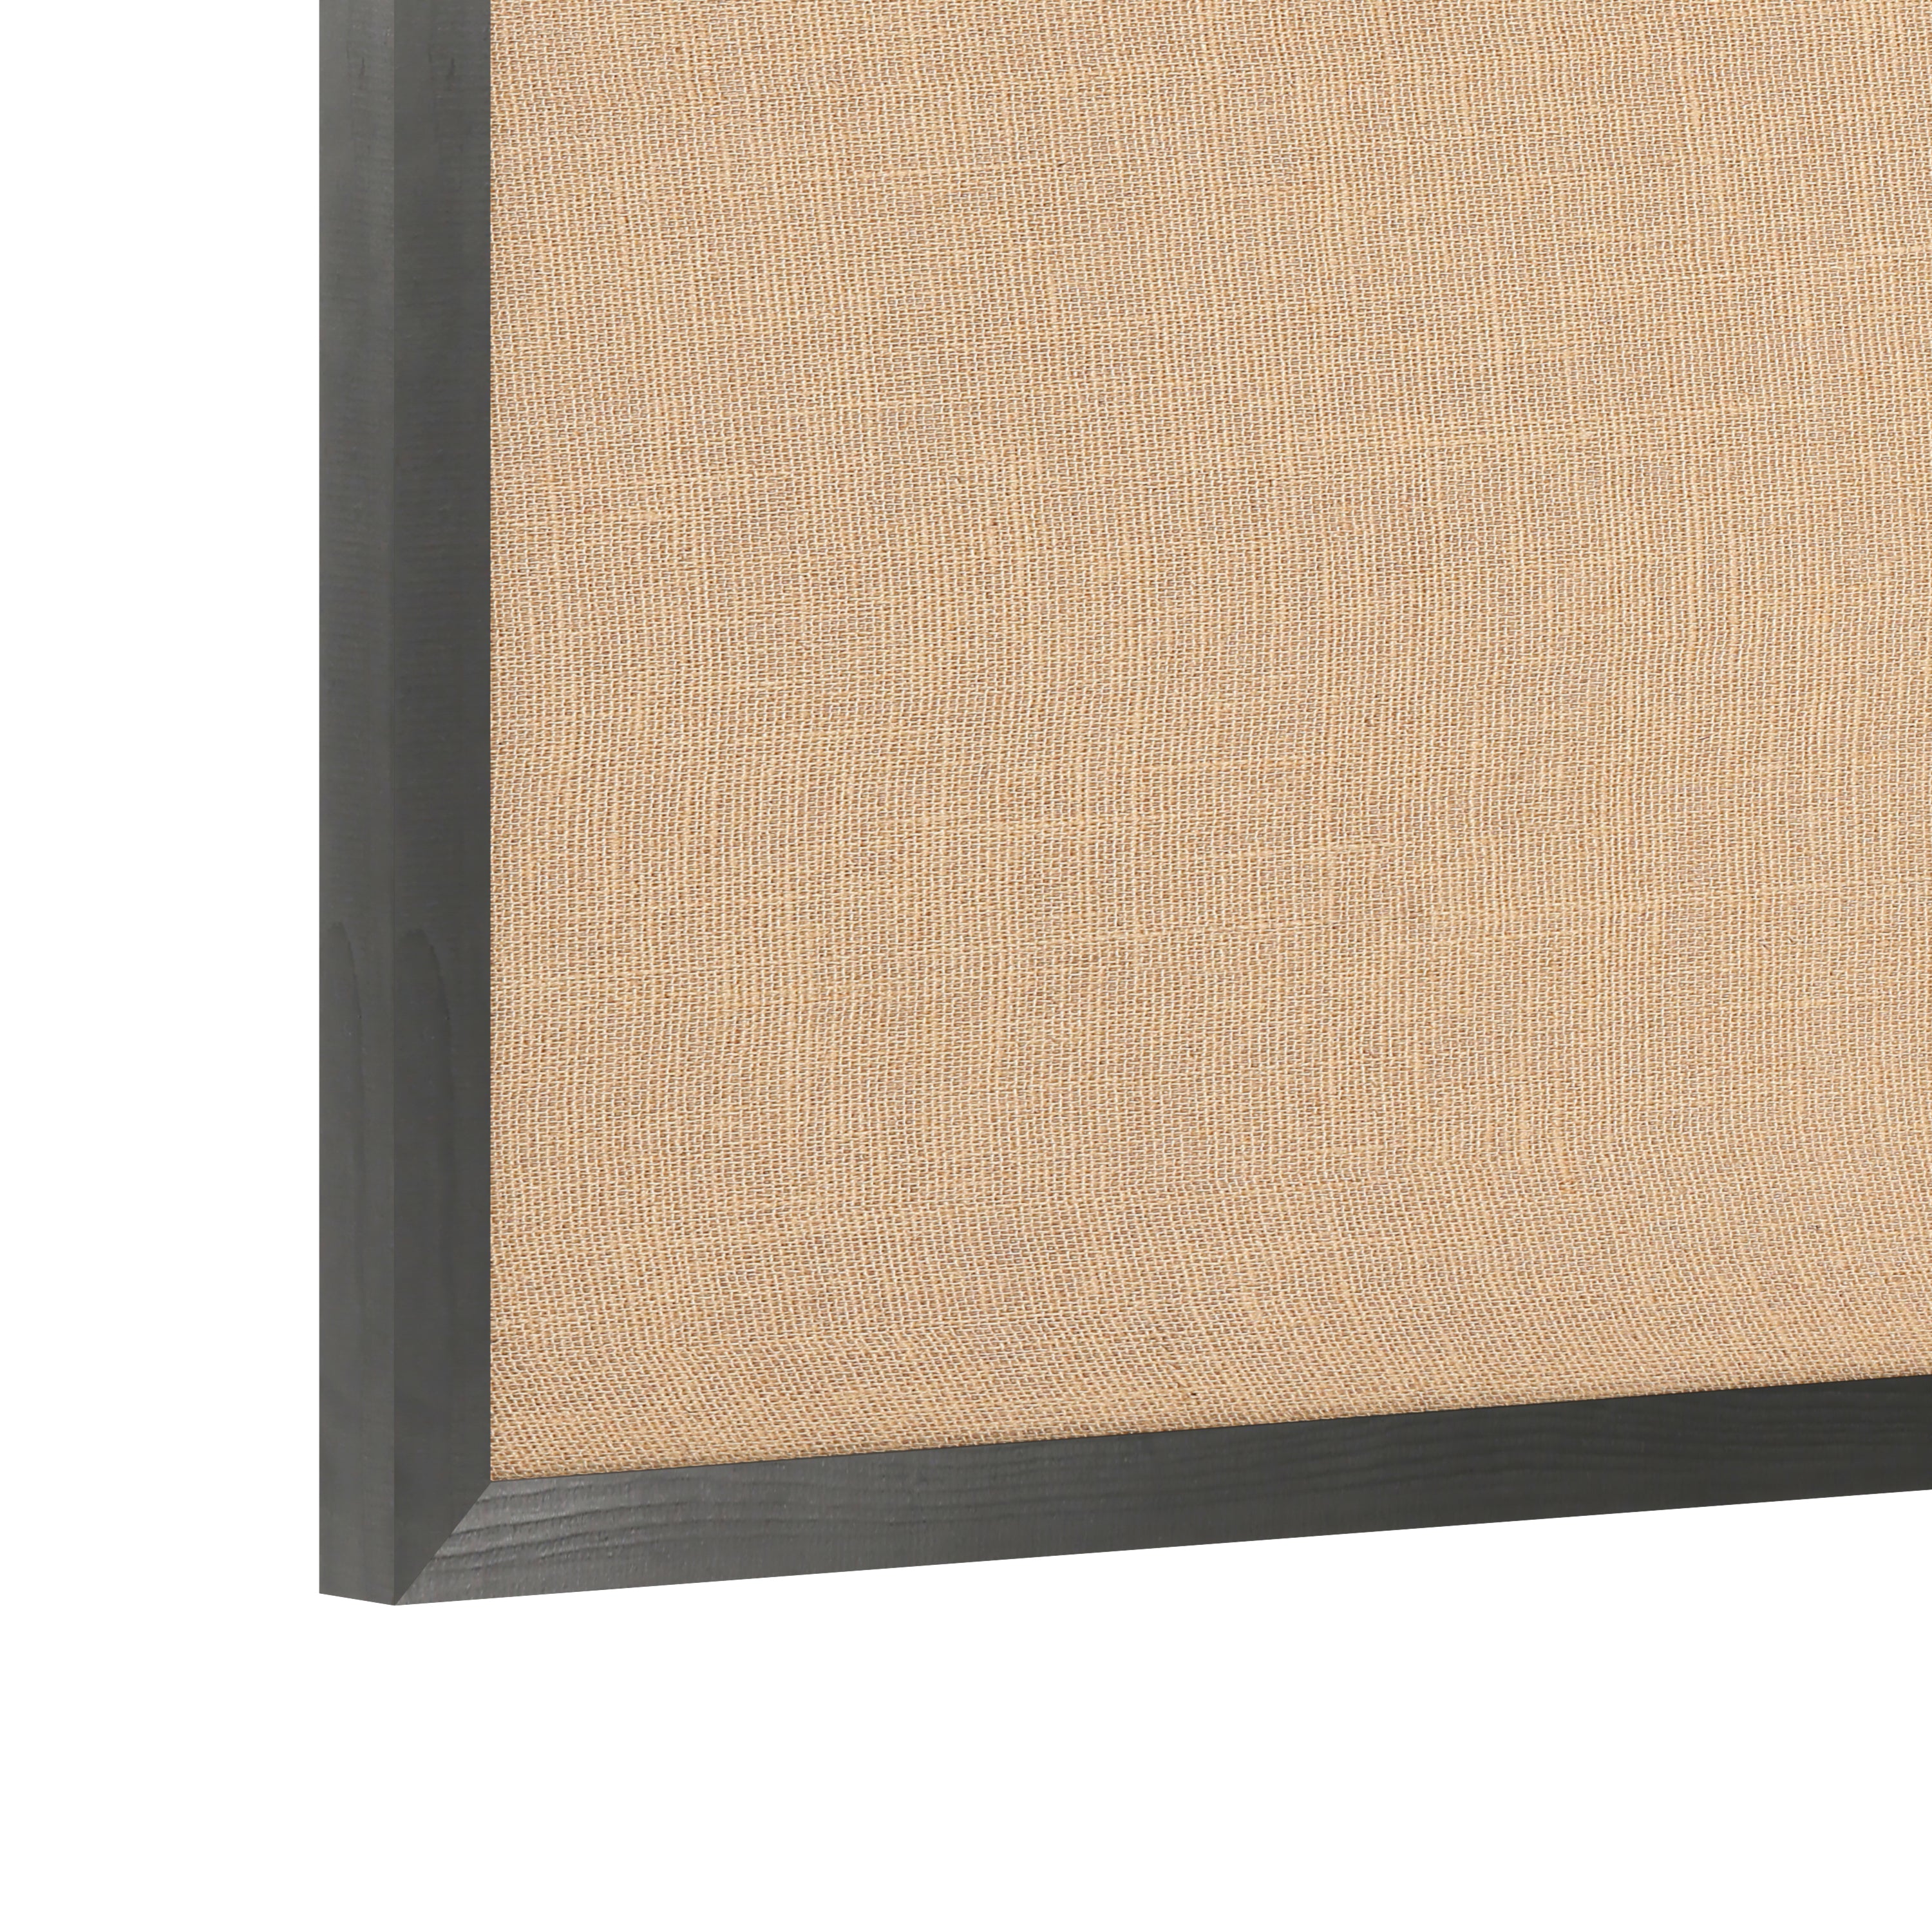 Juno Rustic Wall Mount Linen Board with Wood Push Pins, for Home, School or Business-Linen Boards-Flash Furniture-Wall2Wall Furnishings